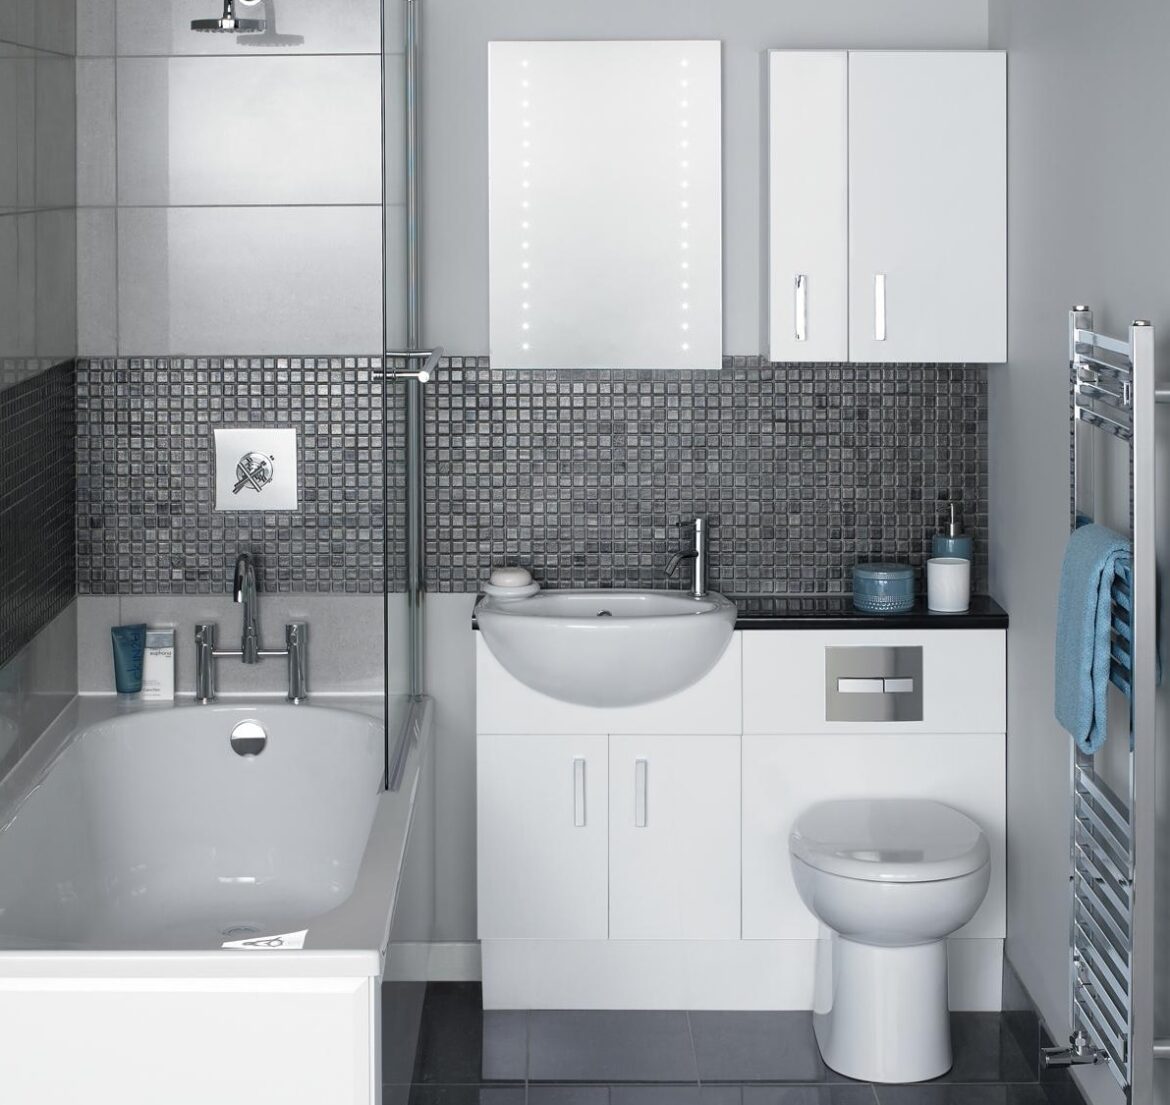 Tips For Fitting Out A Small Bathroom